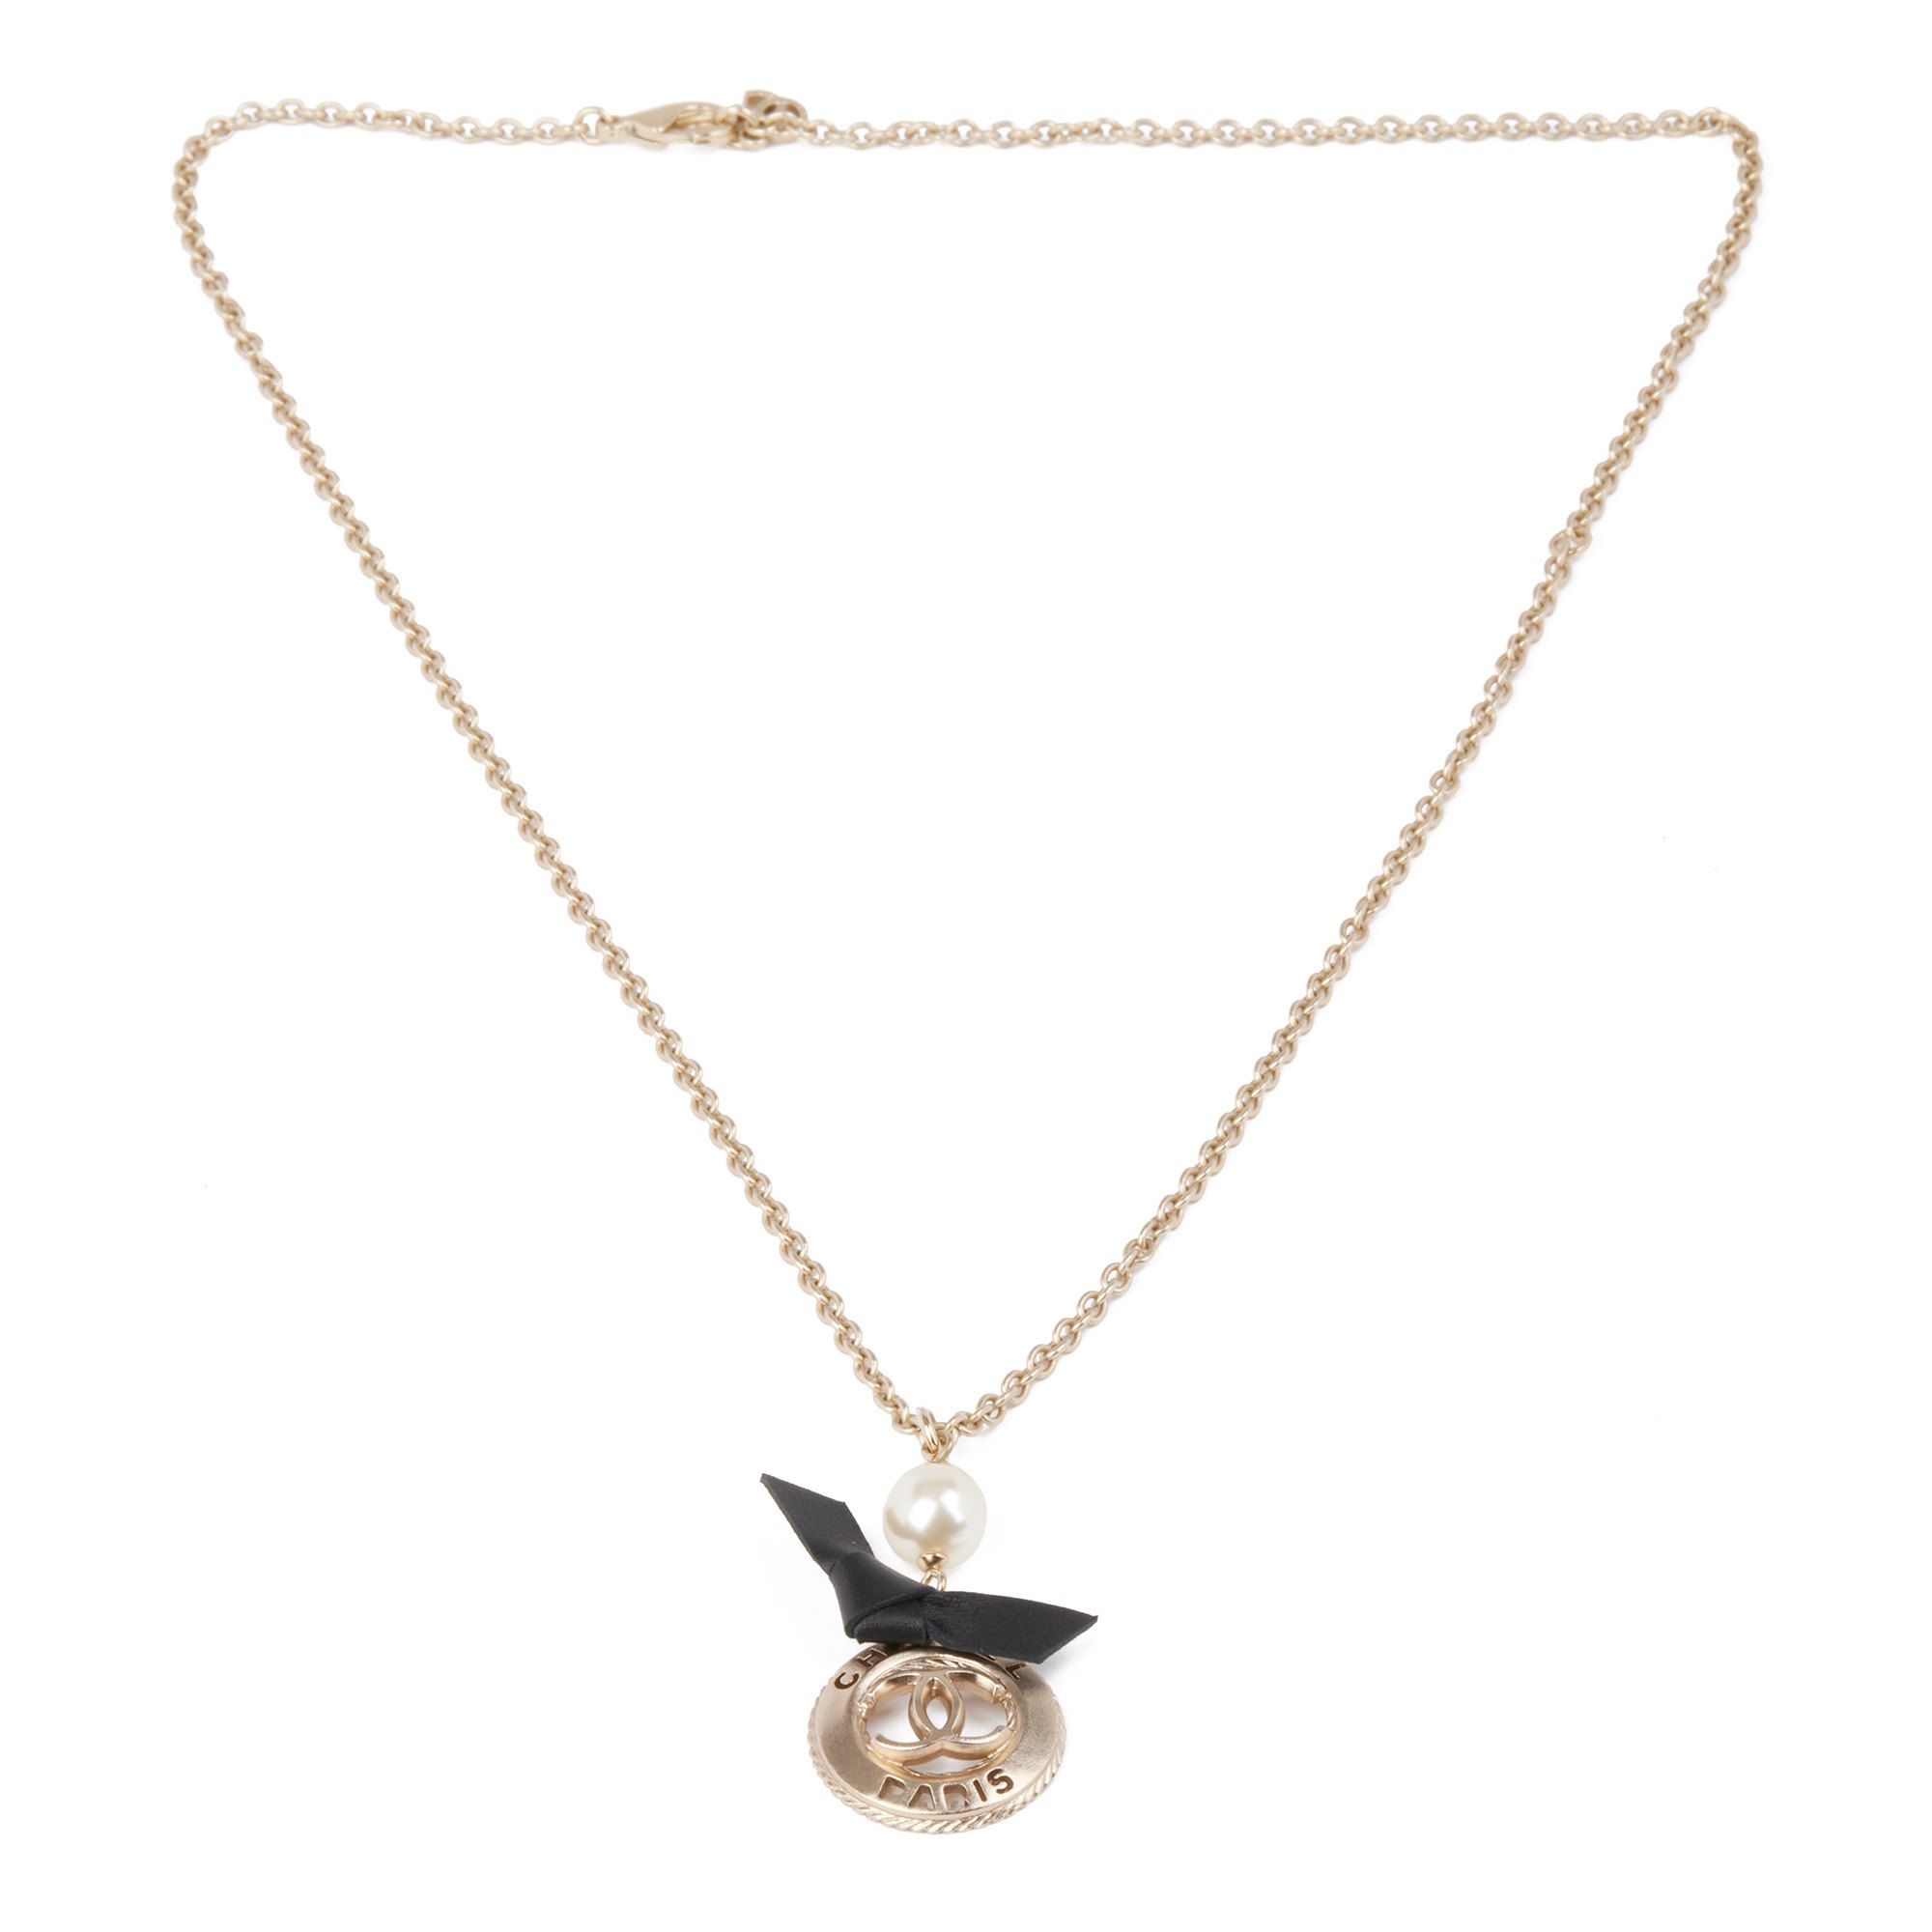 Chanel Lambskin Leather Pearl CC Necklace